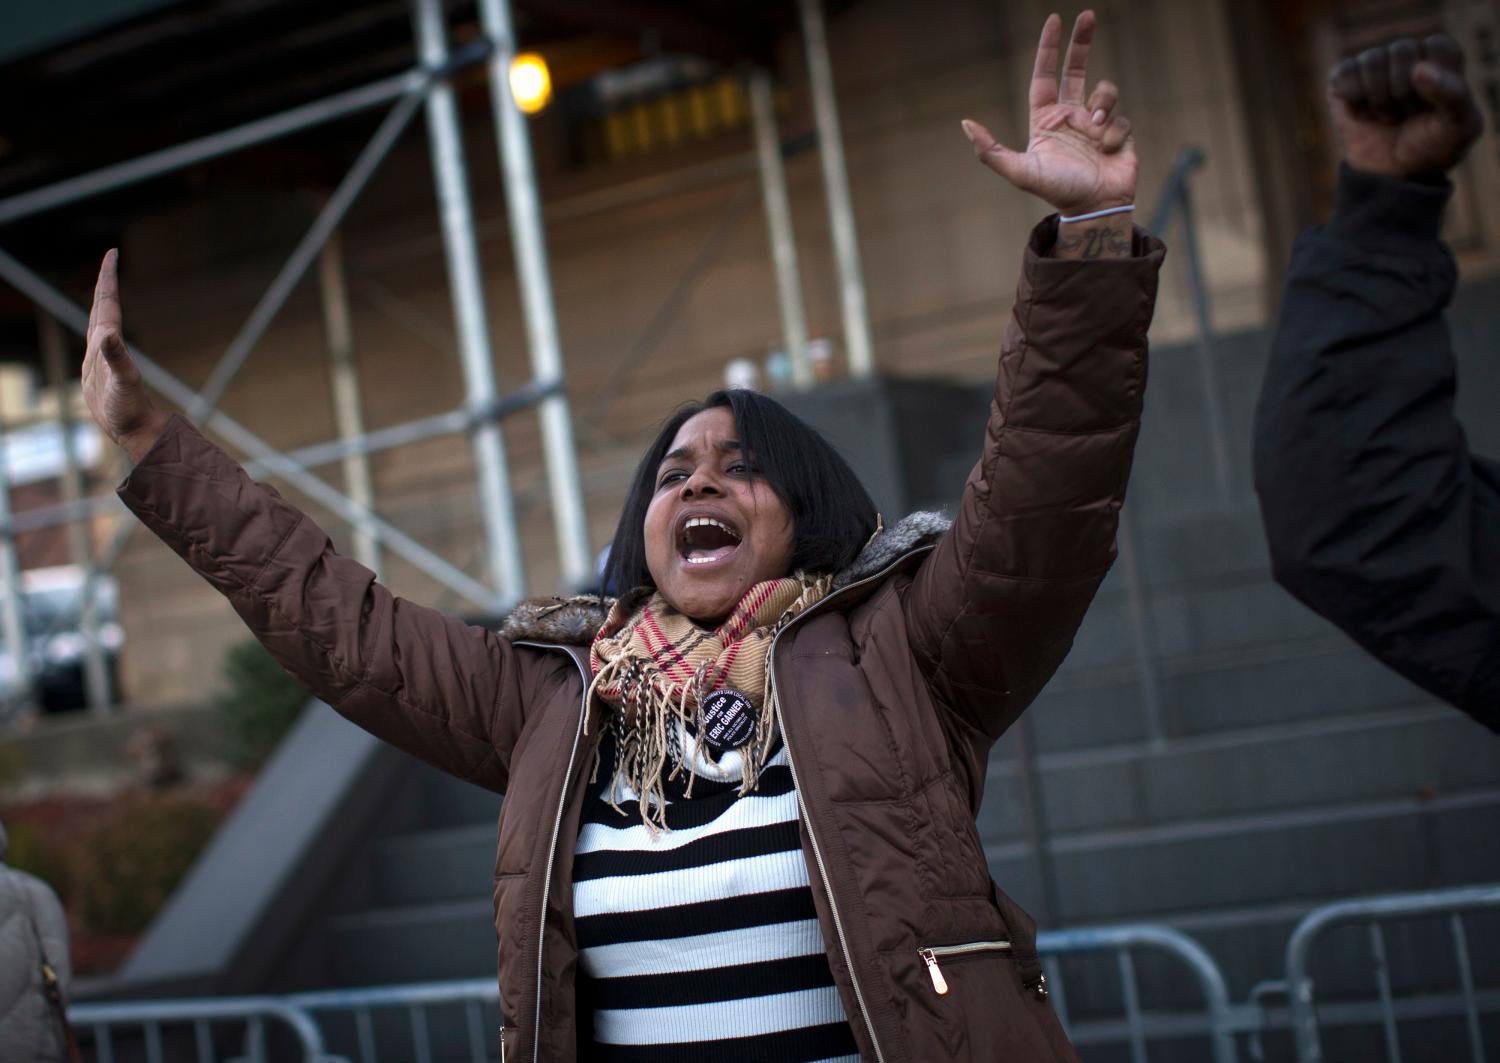 Erica Garner, the daughter of Eric Garner leads a chant at a protest and candlelight vigil outside the 120th police precinct in the Staten Island borough of New York City, January 15, 2015. Protests were organized to coincide with Martin Luther King Jr's birthday and have been ongoing in New York since last year's shooting death of Michael Brown in Ferguson, Missouri and Eric Garner's chokehold death in Staten Island, New York. Both deaths were at the hands of local police forces and in both instances, charges were not laid for the deaths. REUTERS/Mike Segar (UNITED STATES - Tags: CRIME LAW CIVIL UNREST)